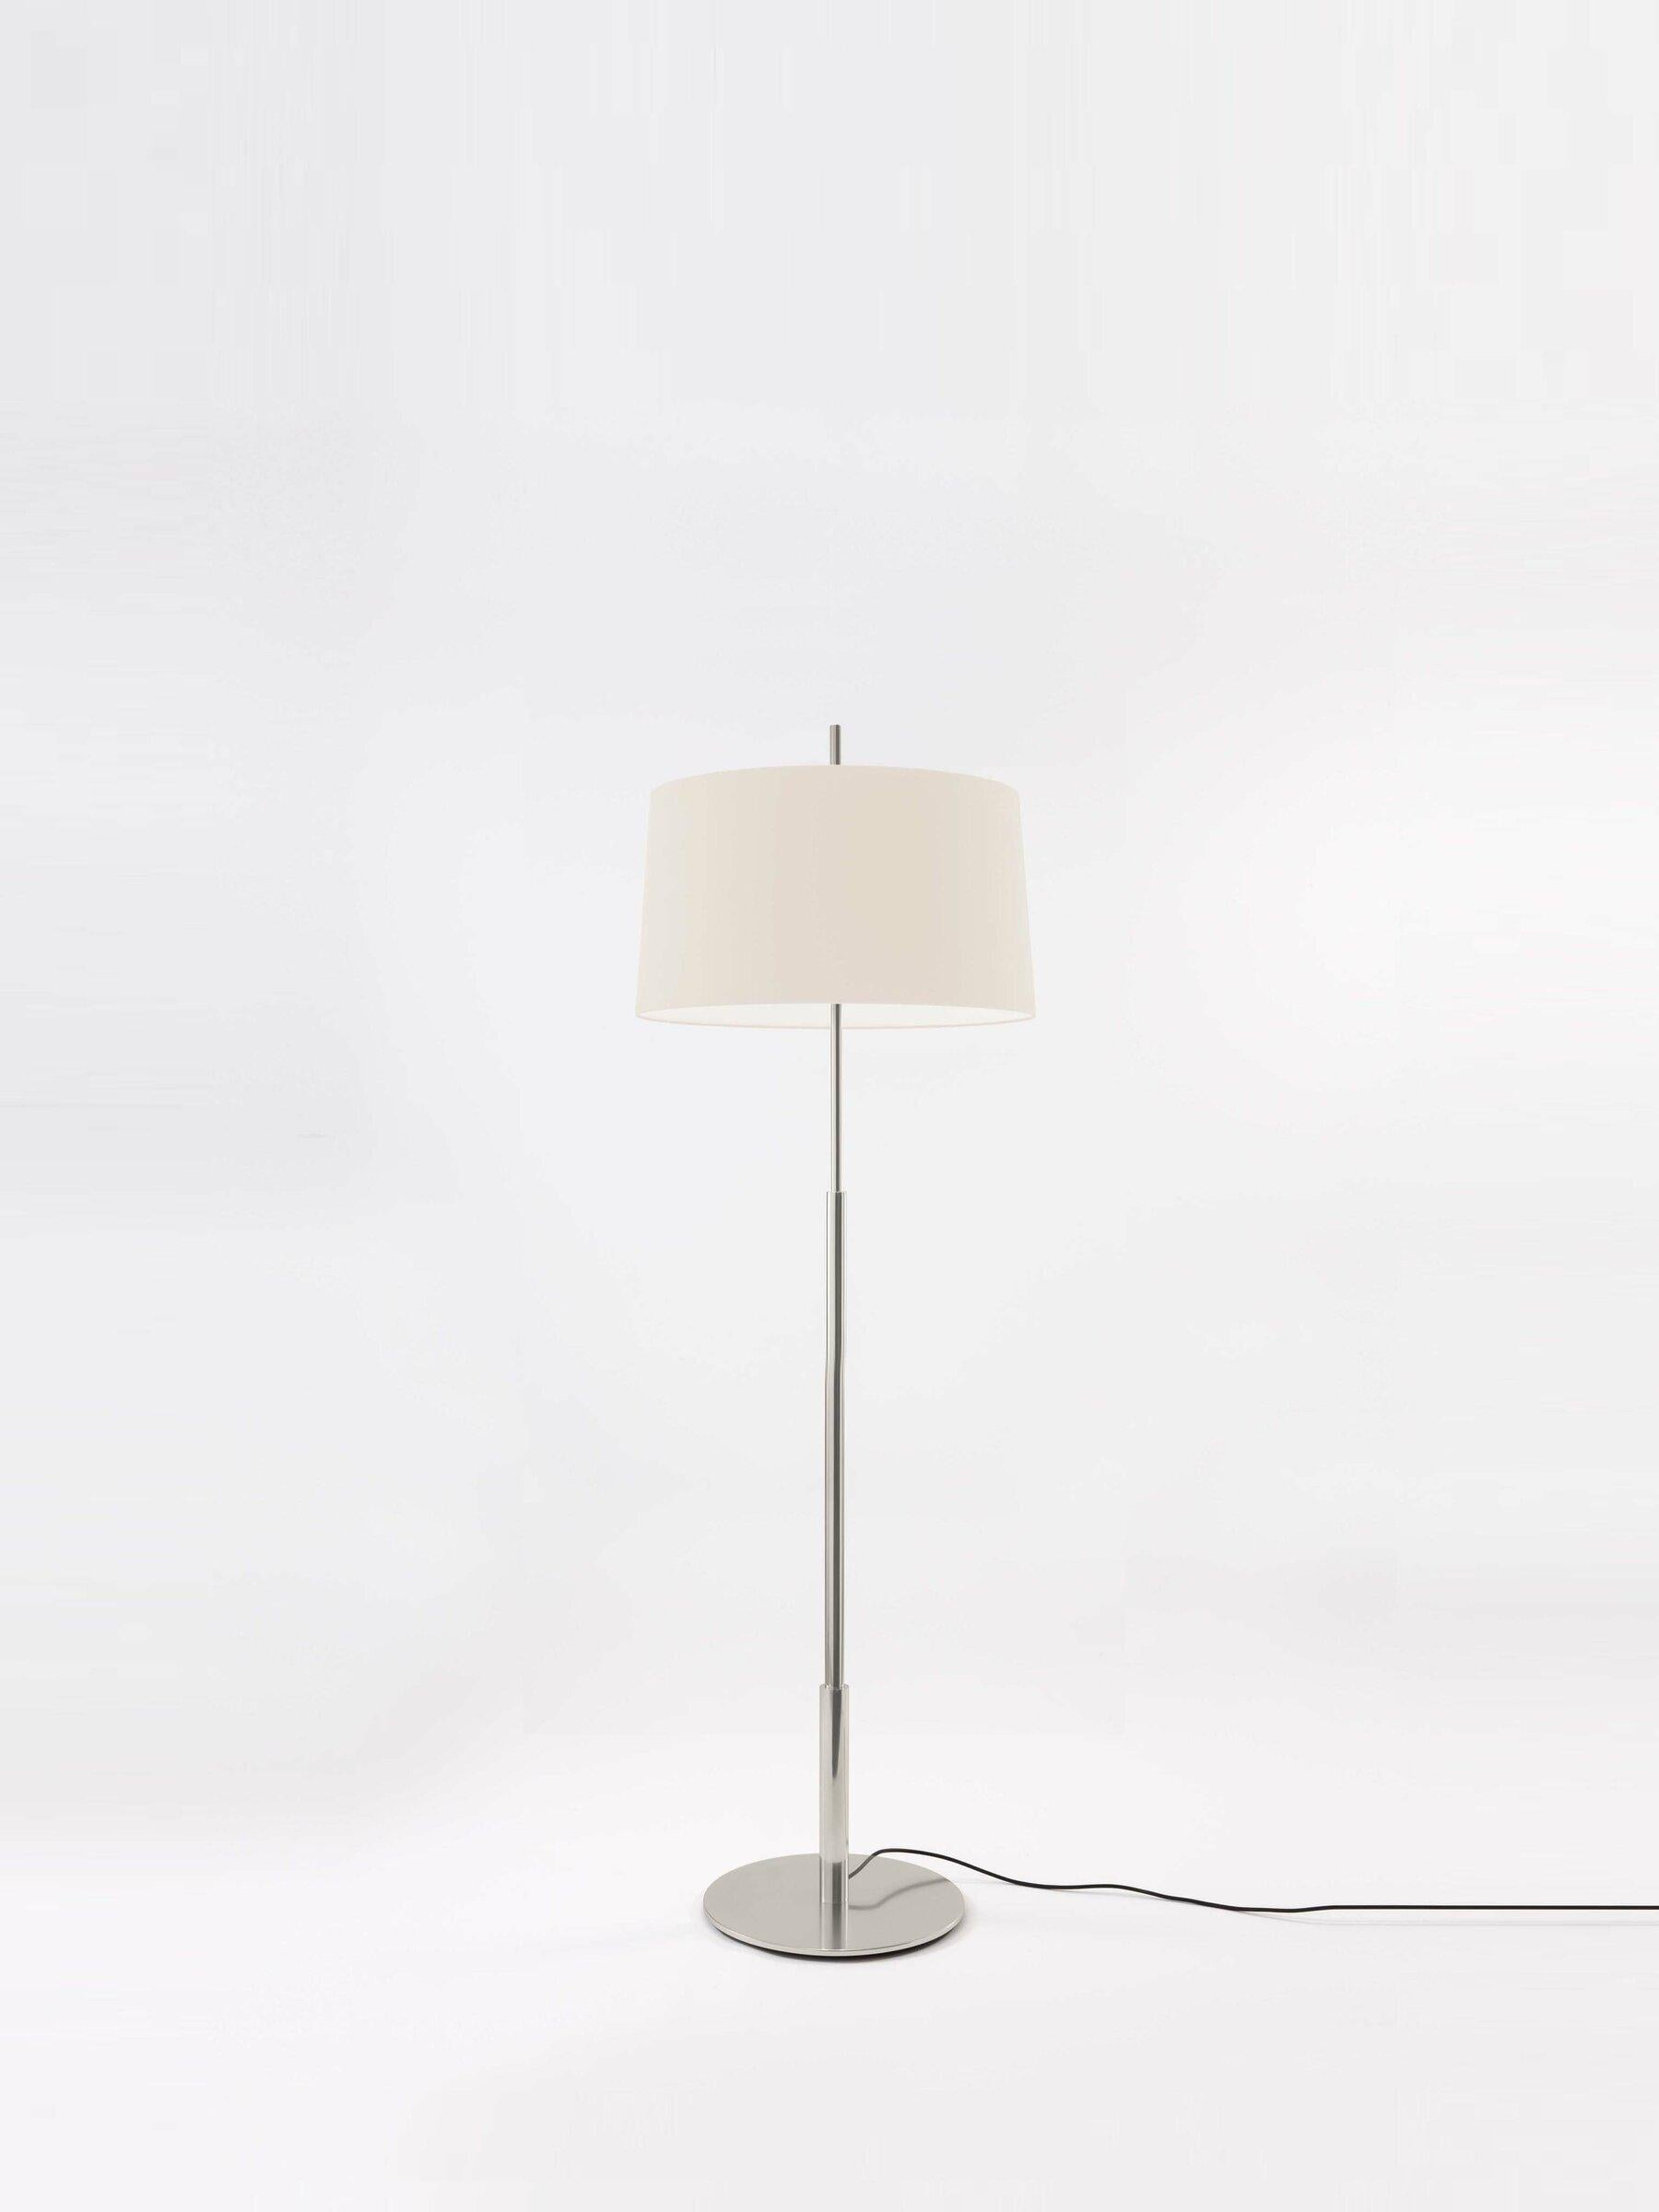 Nickel diana floor lamp by Federico Correa, Alfonso Milá, Miguel Milá
Dimensions: D 45 x H 146 cm
Materials: Metal, linen.
Available in nickel or gold and in black or white shade.

In keeping with the calling of its creators, the Diana lamp has